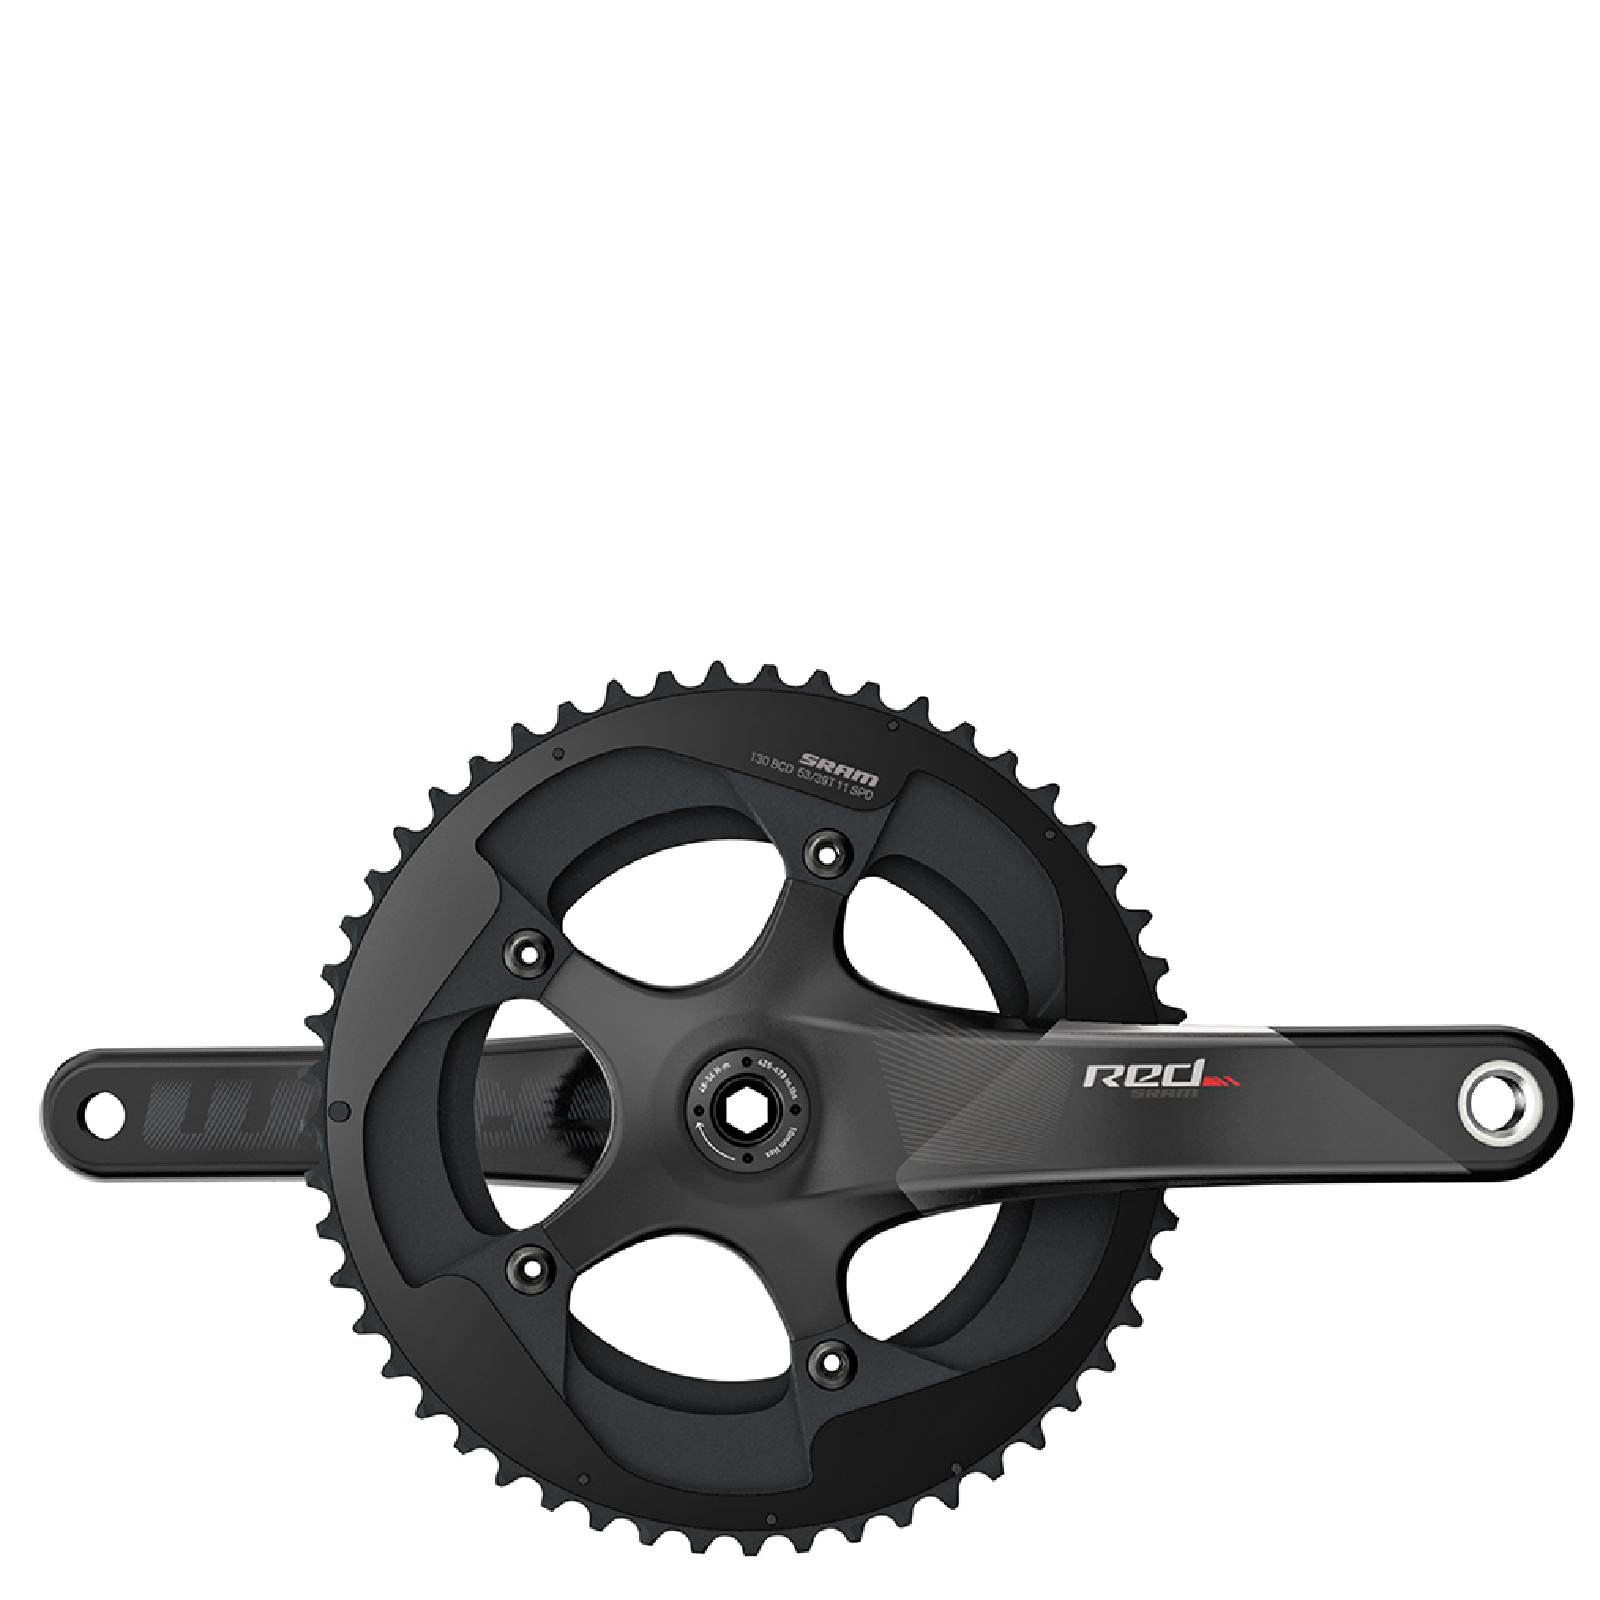 SRAM Red 11 Speed GXP Chainset – 50/34t x 175mm